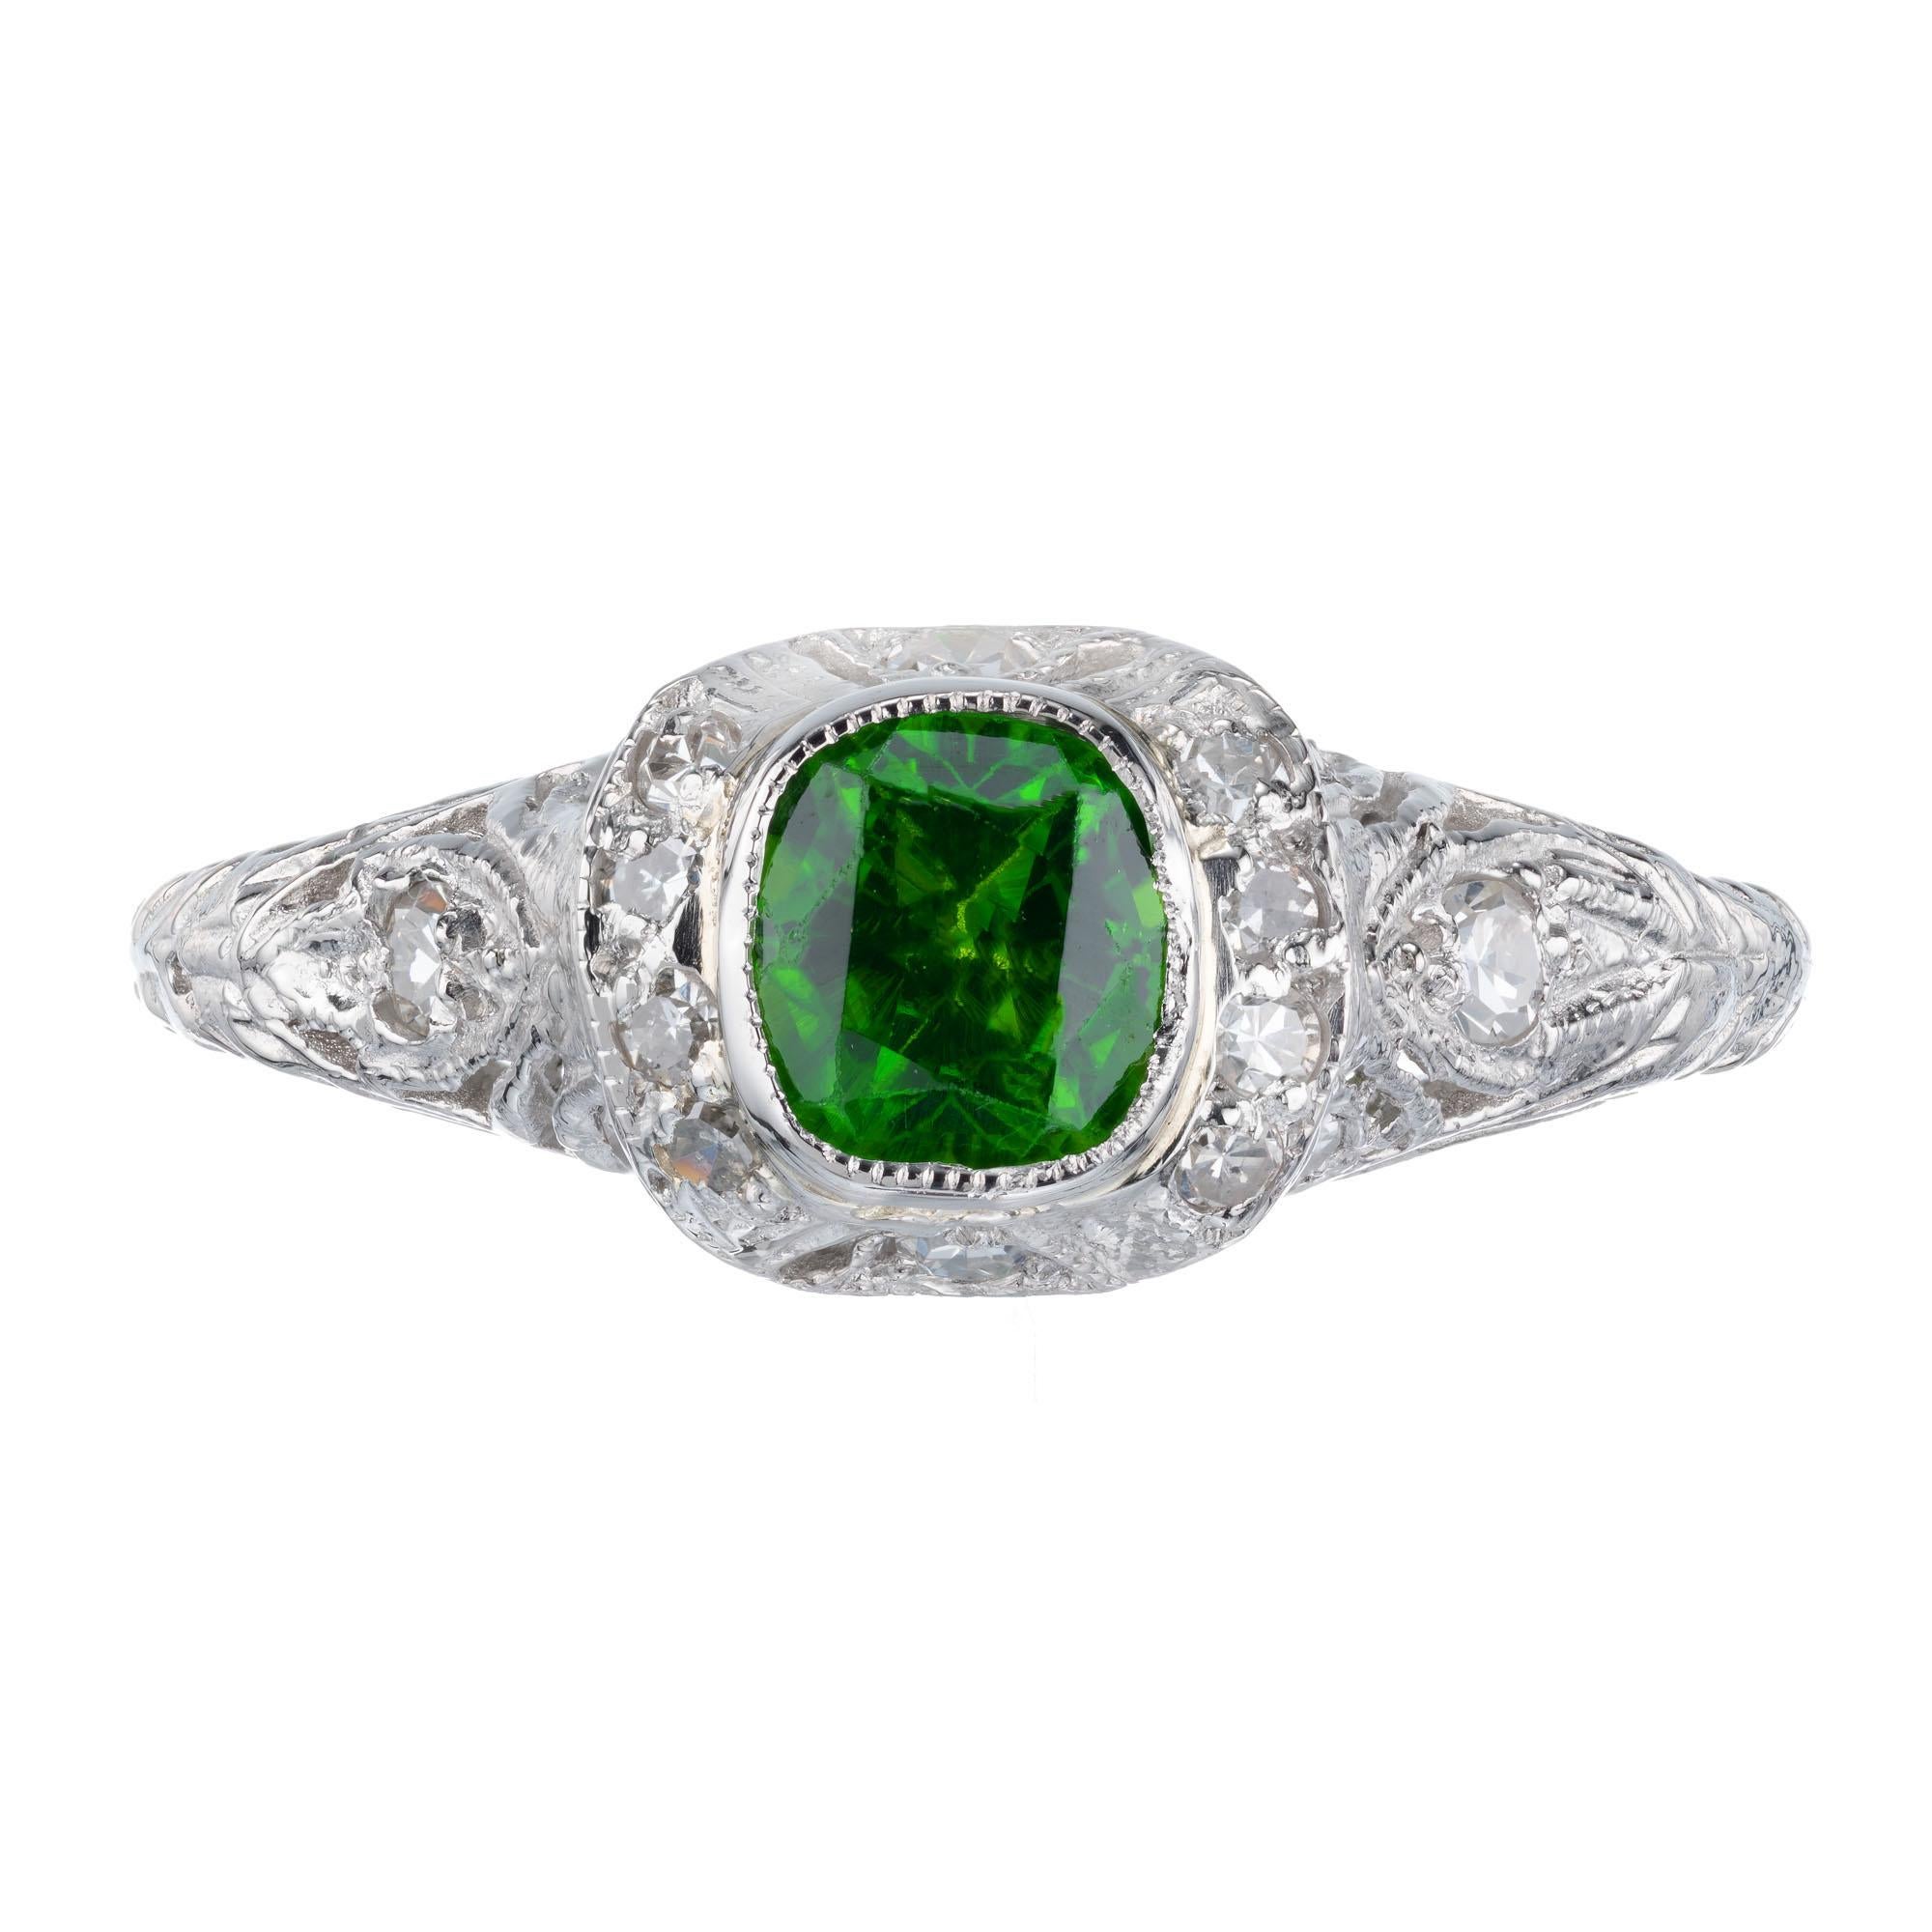 Edwardian 1910 demantoid green garnet and diamond engagement ring. GIA certified simple heat only, cushion cut center stone with round accent diamonds in a platinum filigree setting. 

1 bright green demantoid cushion Garnet, approx. total weight